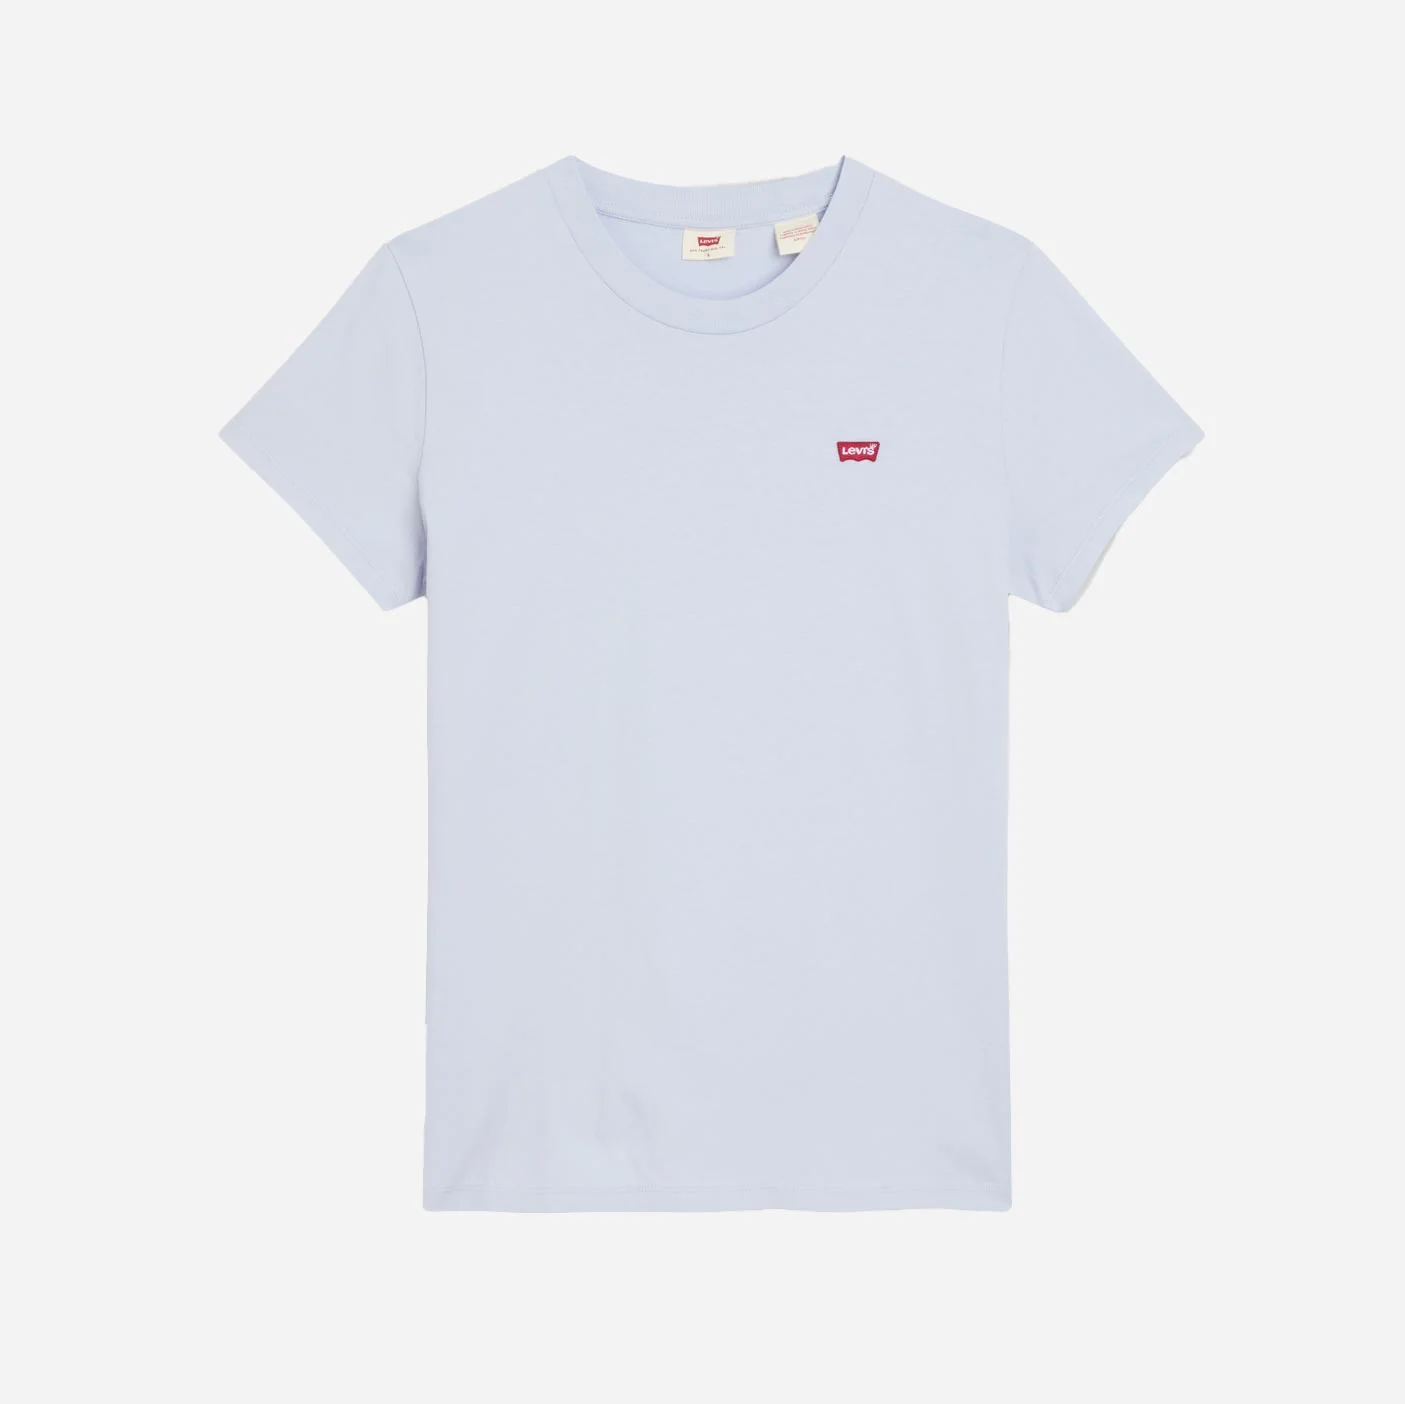 Levis Women's Perfect Tee - Cool Dust